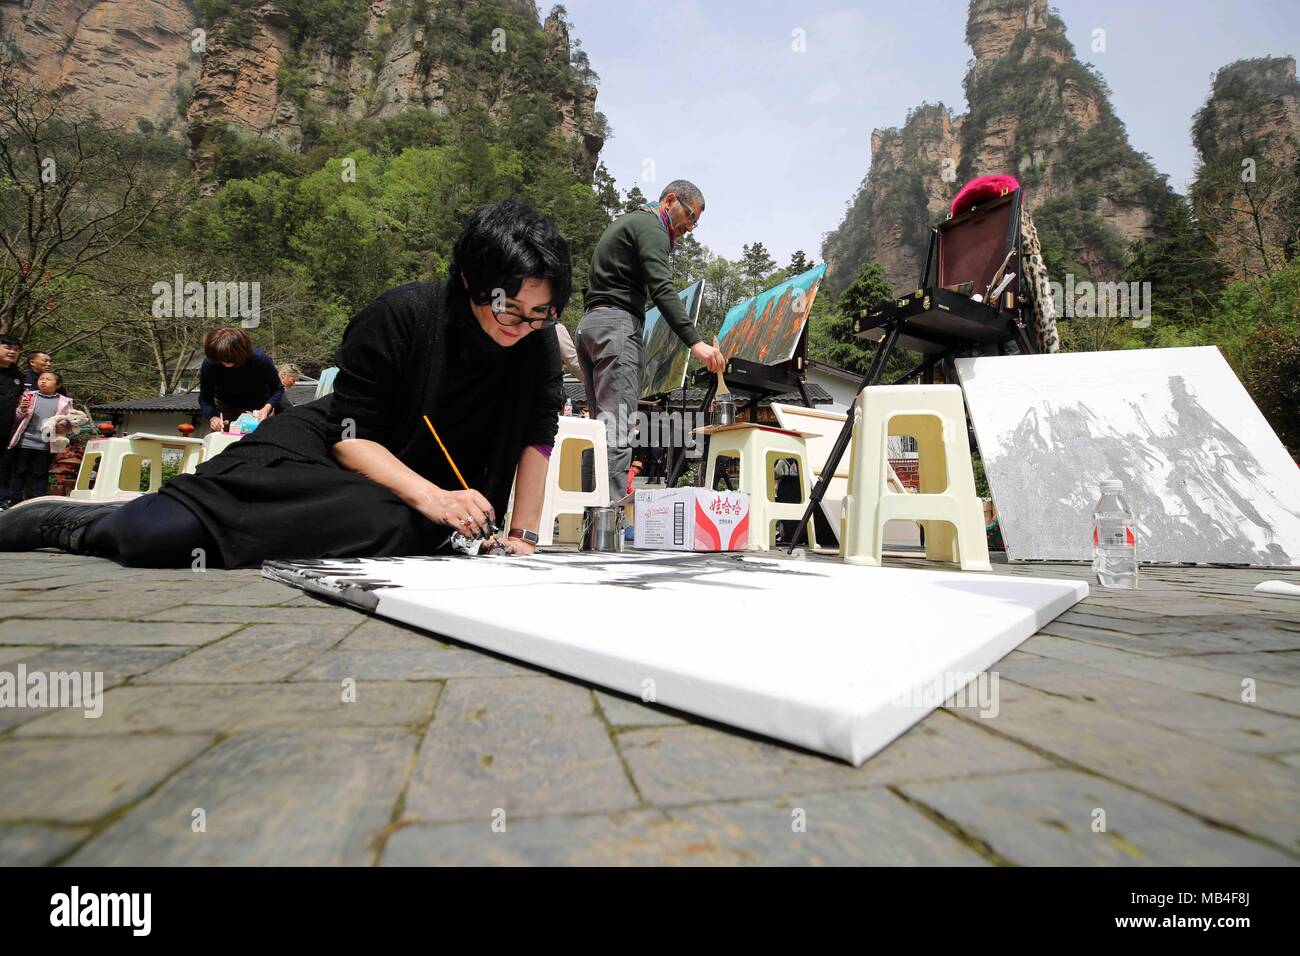 Zhangjiajie, China's Hunan Province. 6th Apr, 2018. Giovanna Fezzi (L) from Italy paints at Zhangjiajie UNESCO Global Geopark at Wulingyuan District of Zhangjiajie City, central China's Hunan Province, April 6, 2018. About 21 artists coming from Italy took part in a cultural event at the geopark which is known for its quartzose sandstone landform. This geopark is one of the geoparks in China that have already been chosen by UNESCO on its World Network of Geoparks. Credit: Wu Yongbing/Xinhua/Alamy Live News Stock Photo